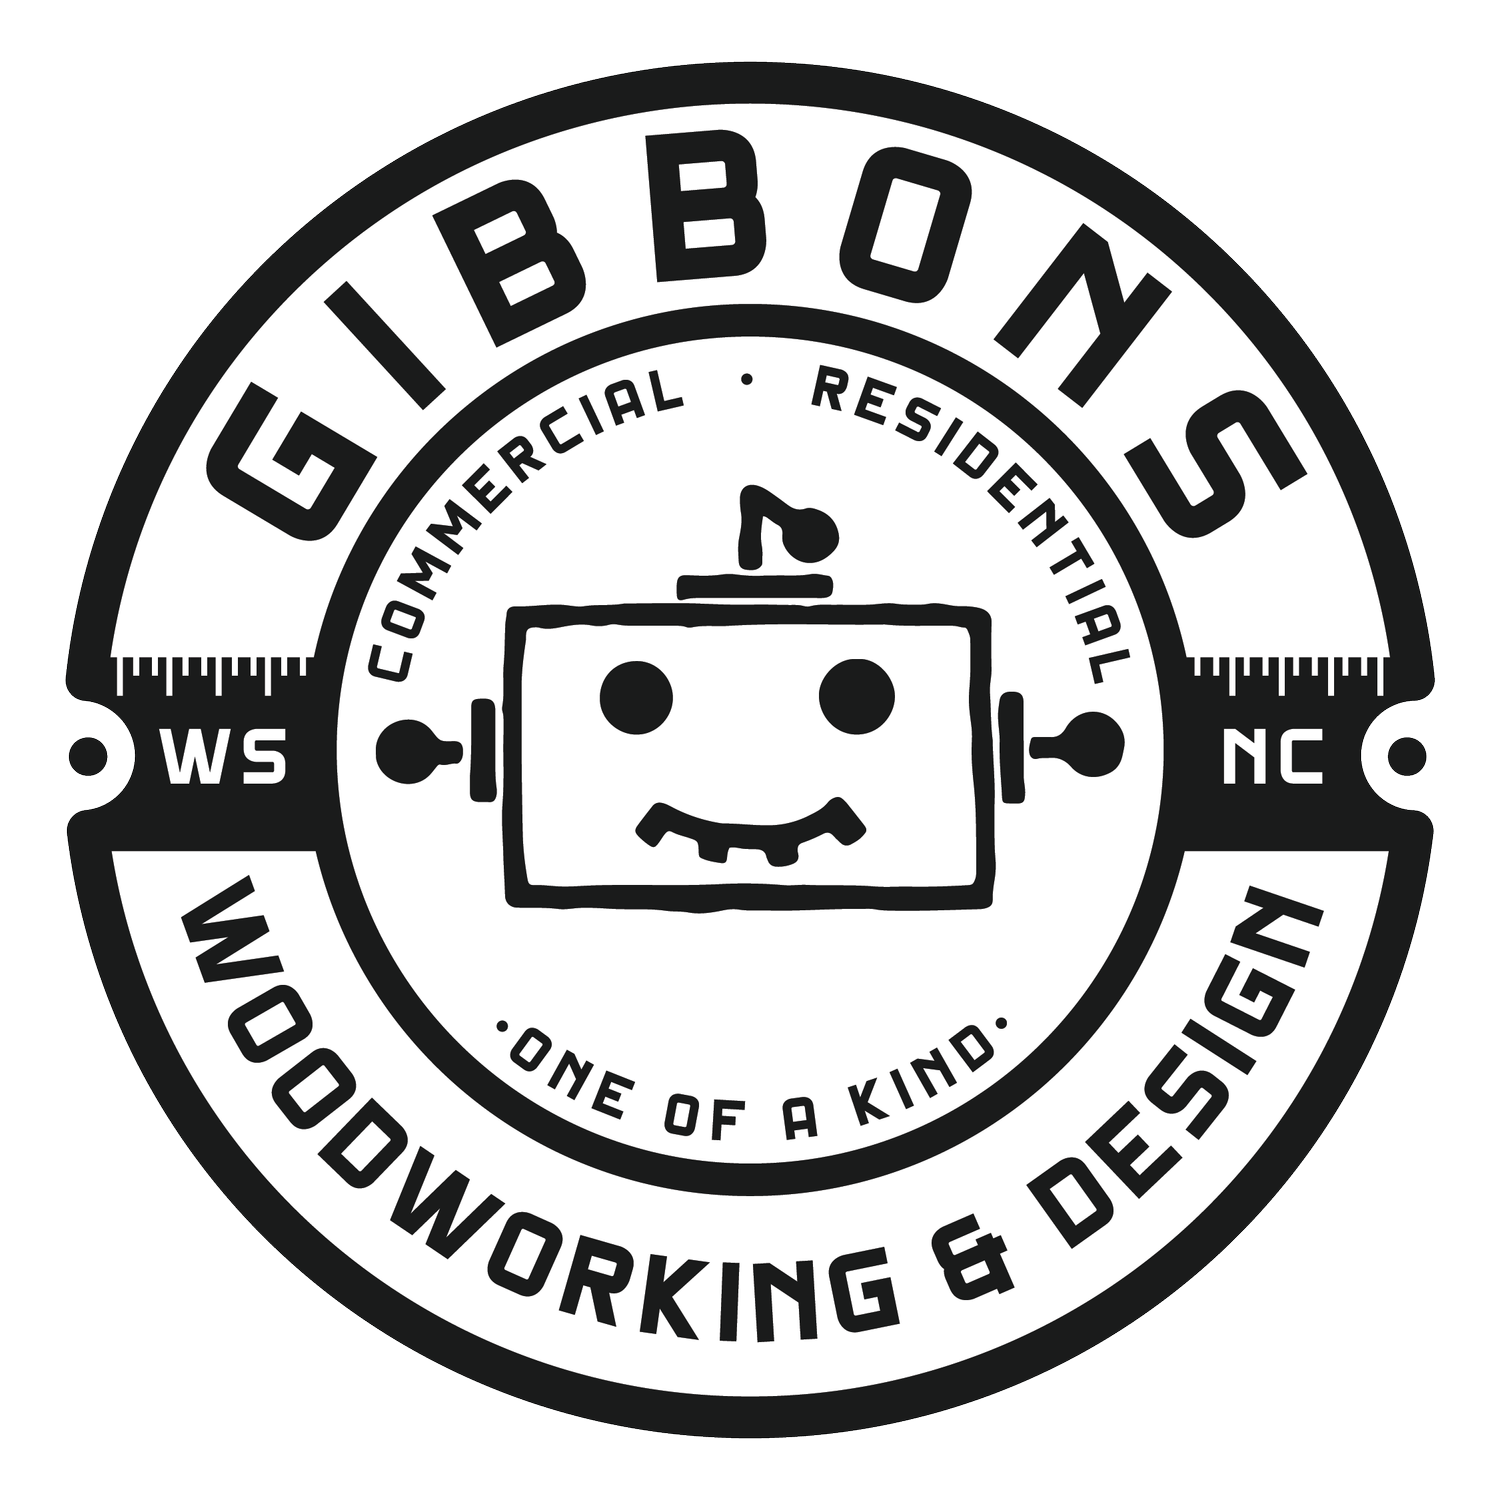 Gibbons Woodworking and Design